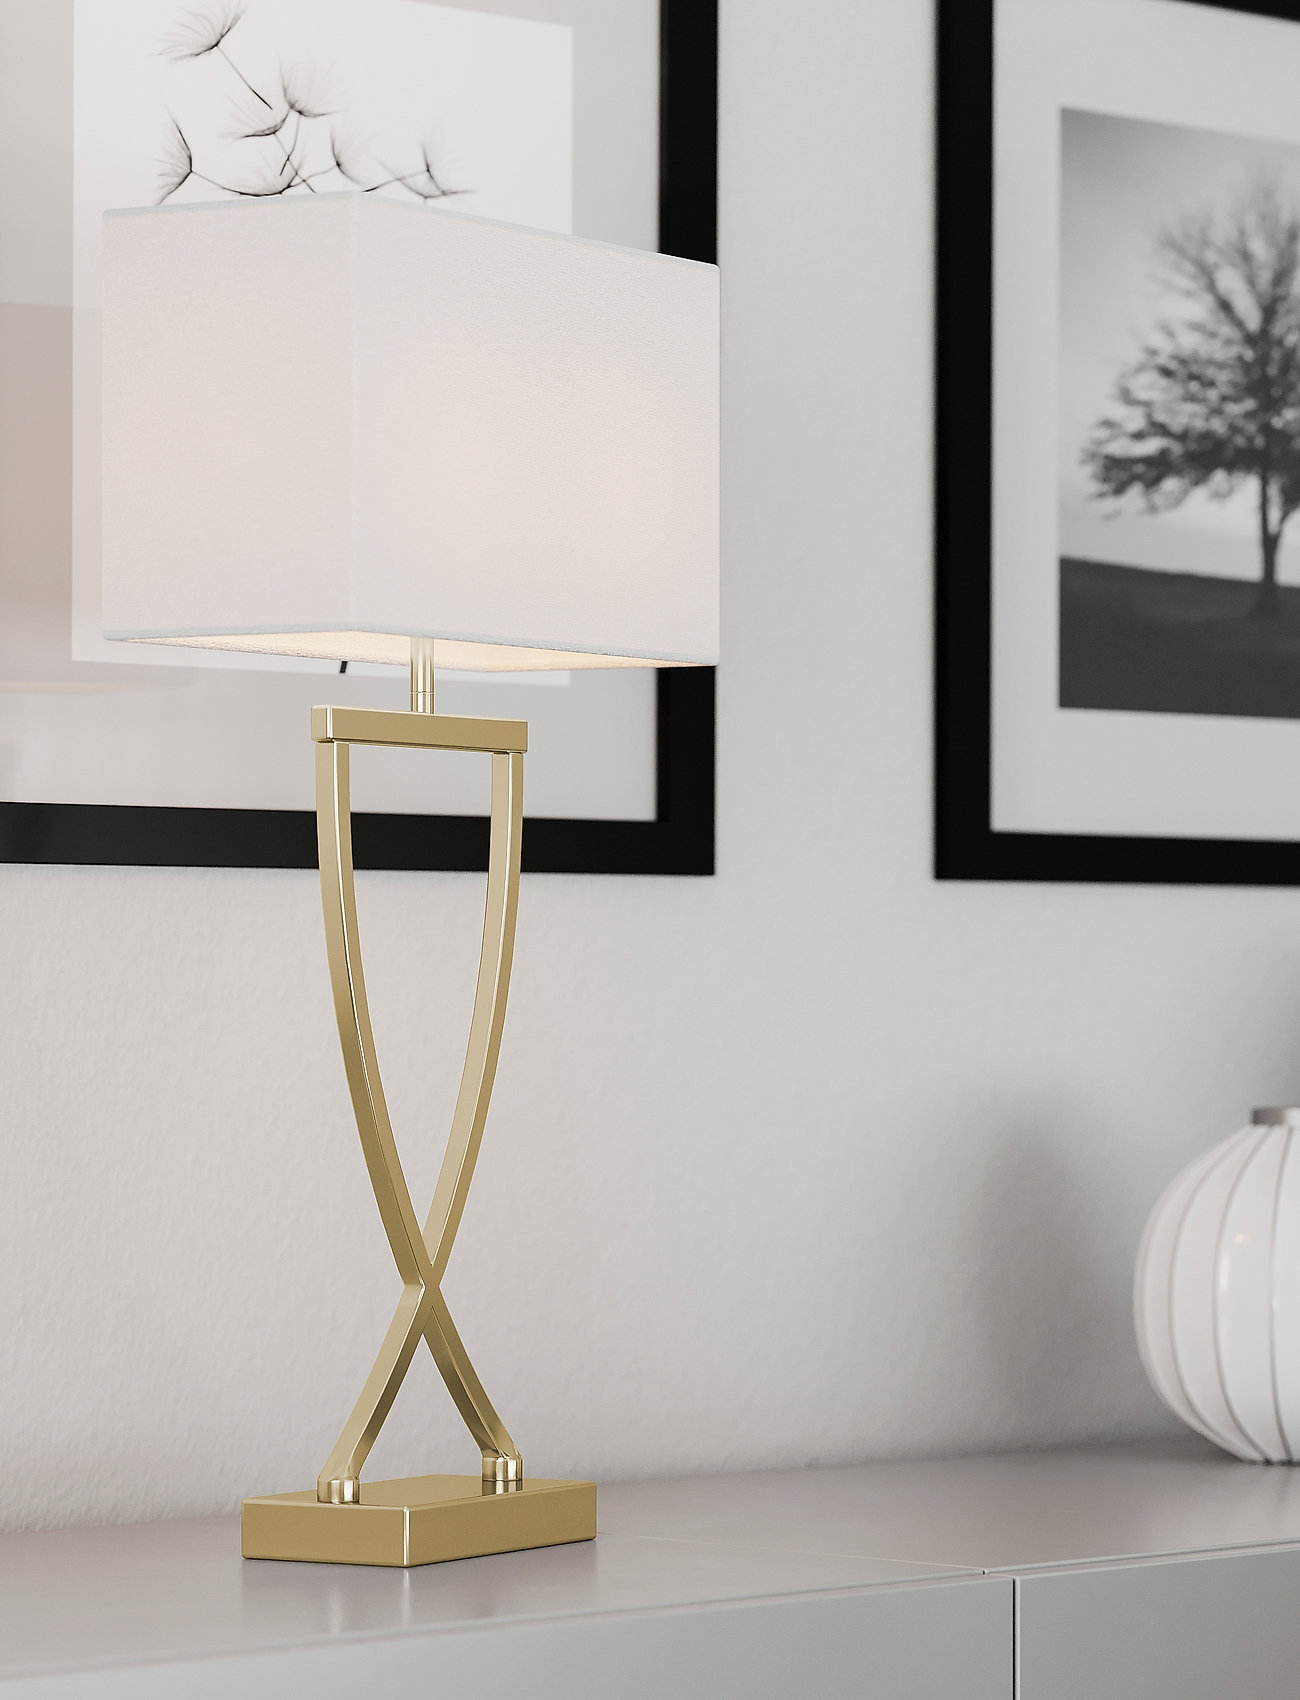 By Rydéns - Omega Table lamp - desk & table lamps - brass white - 1